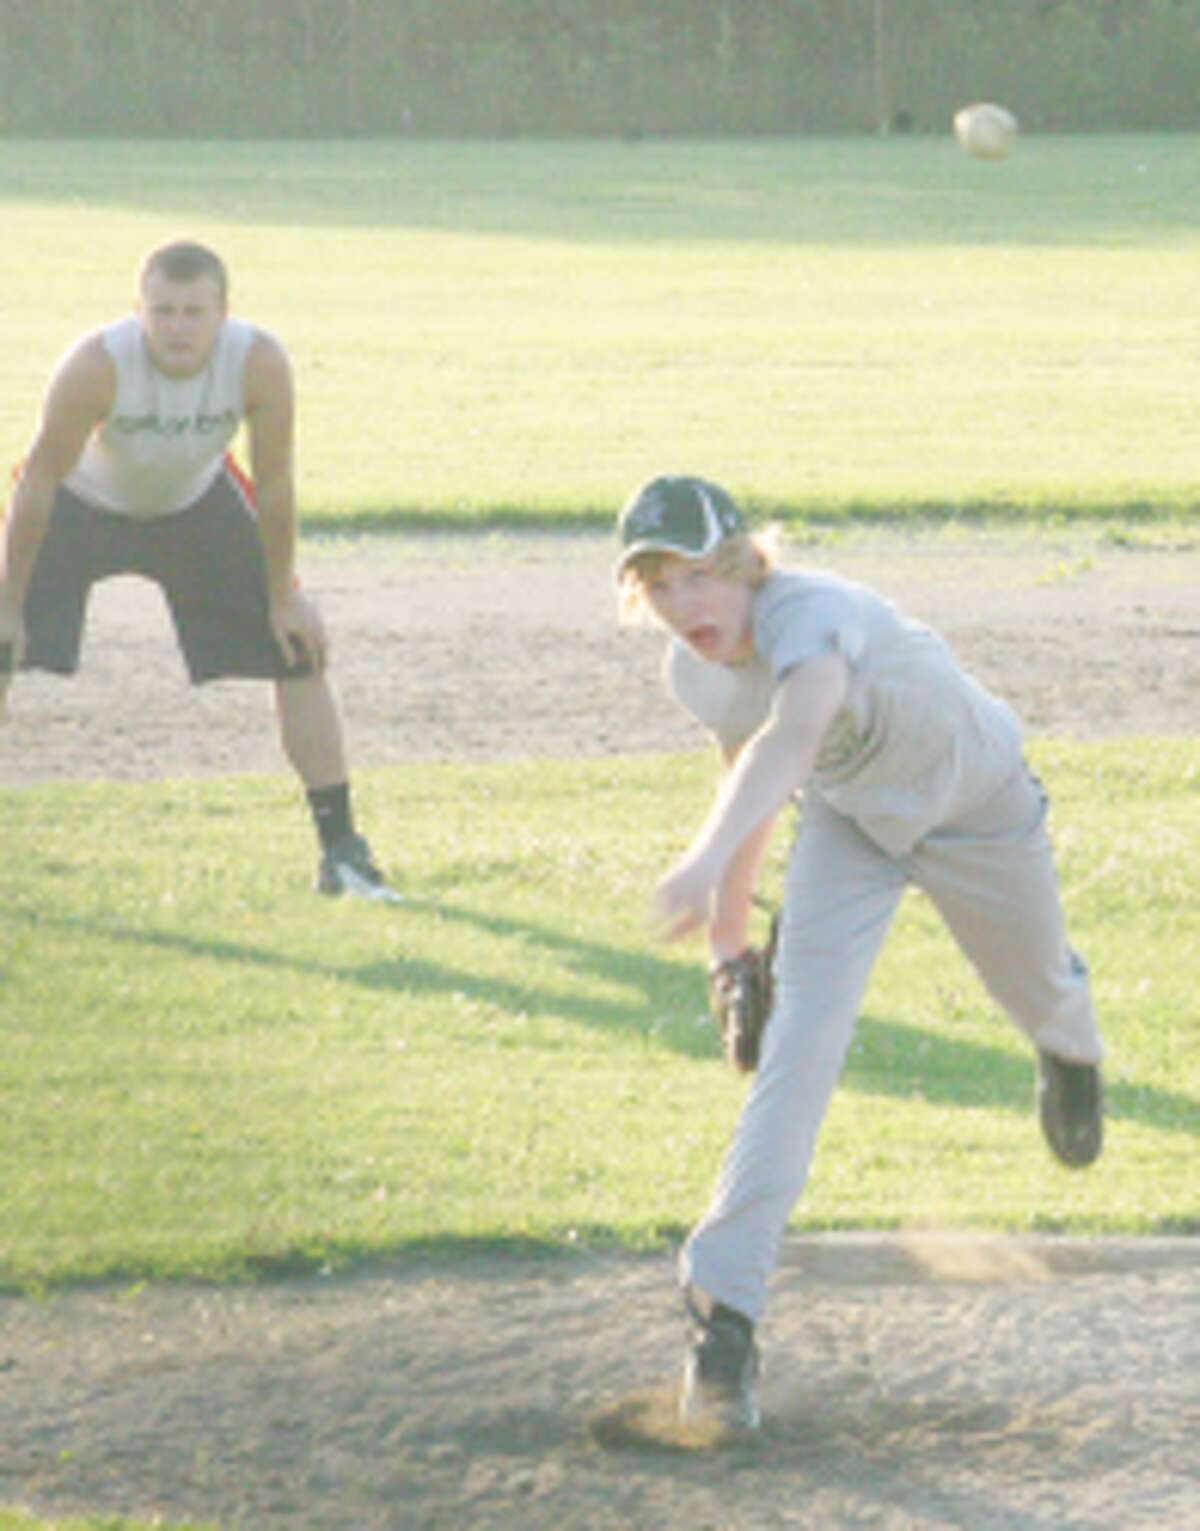 summer games: Payton Pacola delivers a pitch for Pine River during a recent summer game. (File photo)